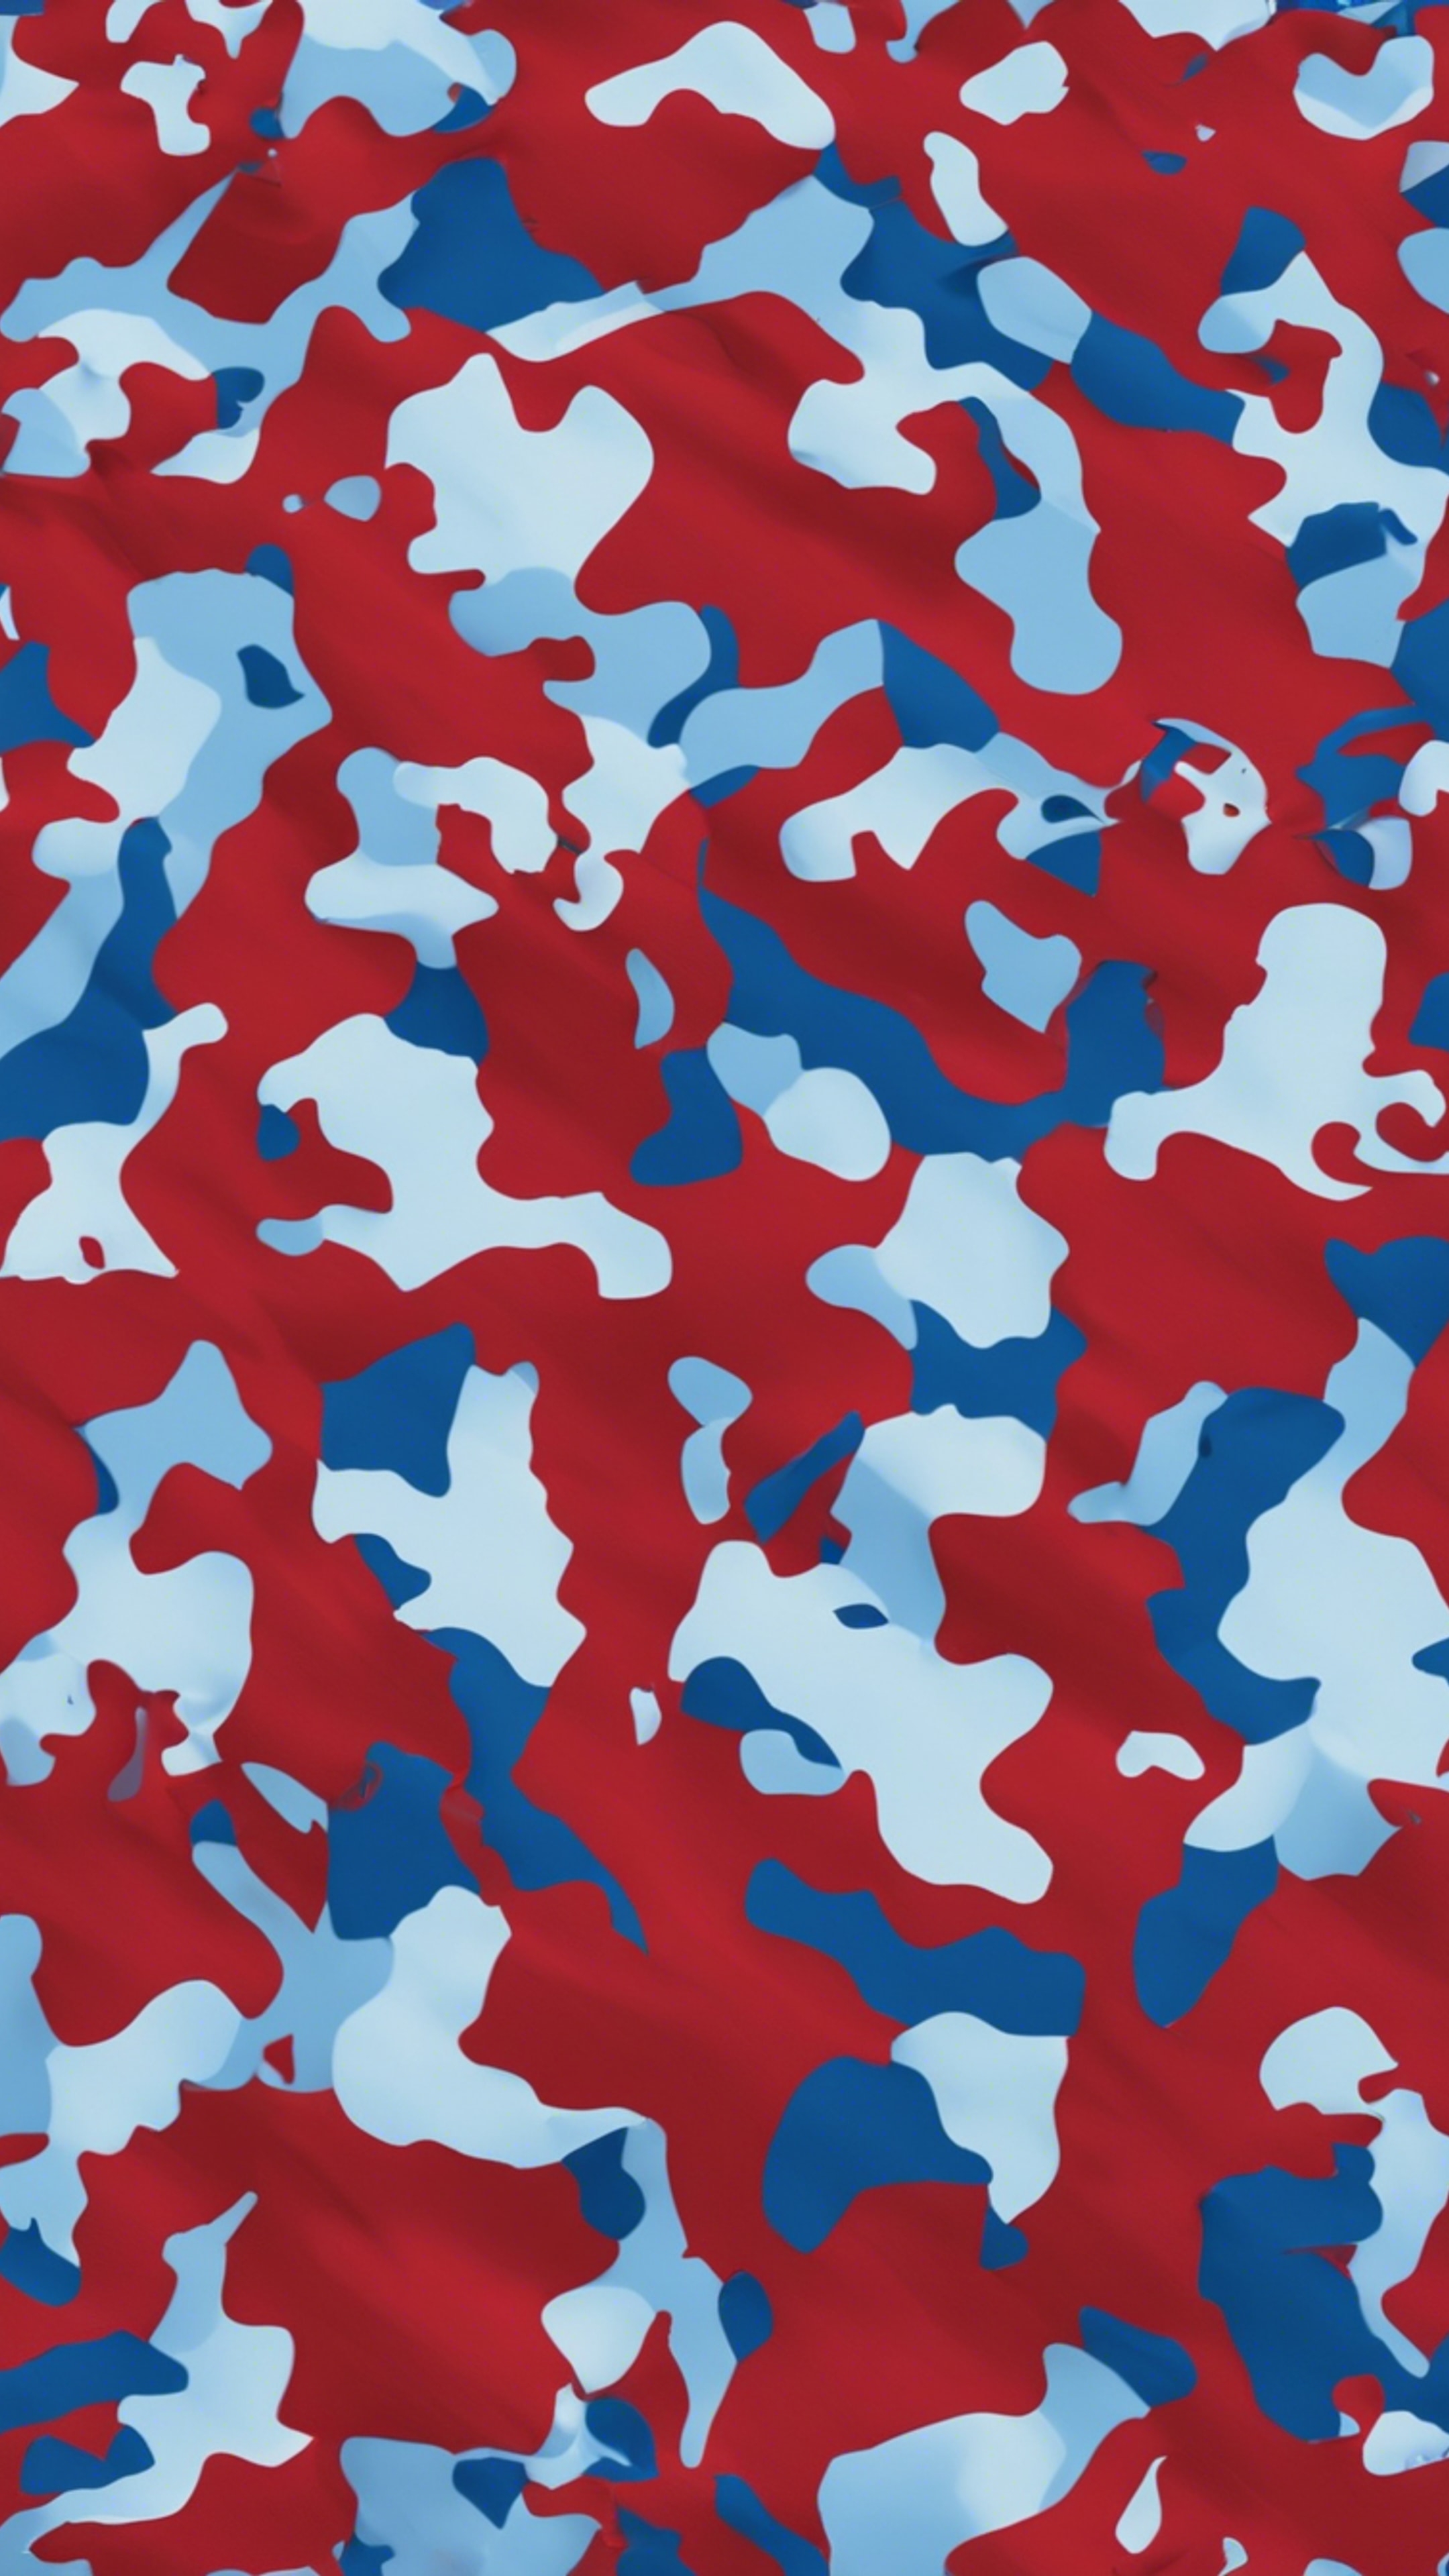 A seamles pattern of red and blue camouflage. Wallpaper[edd7b72010f24e93b1c5]